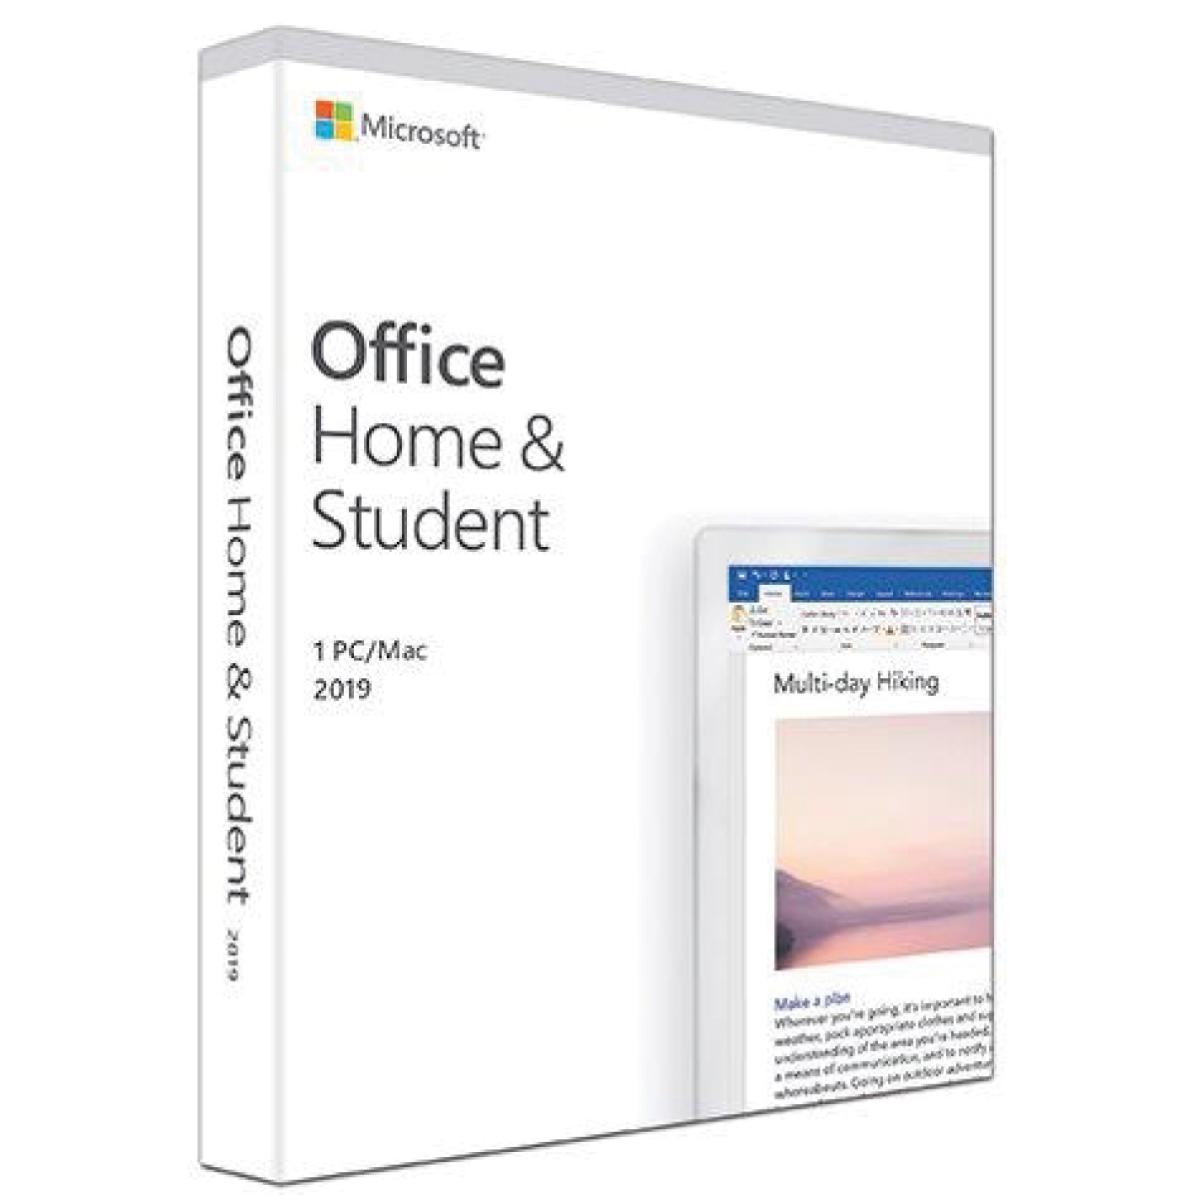 Office Home And Business 2019 Windows 7